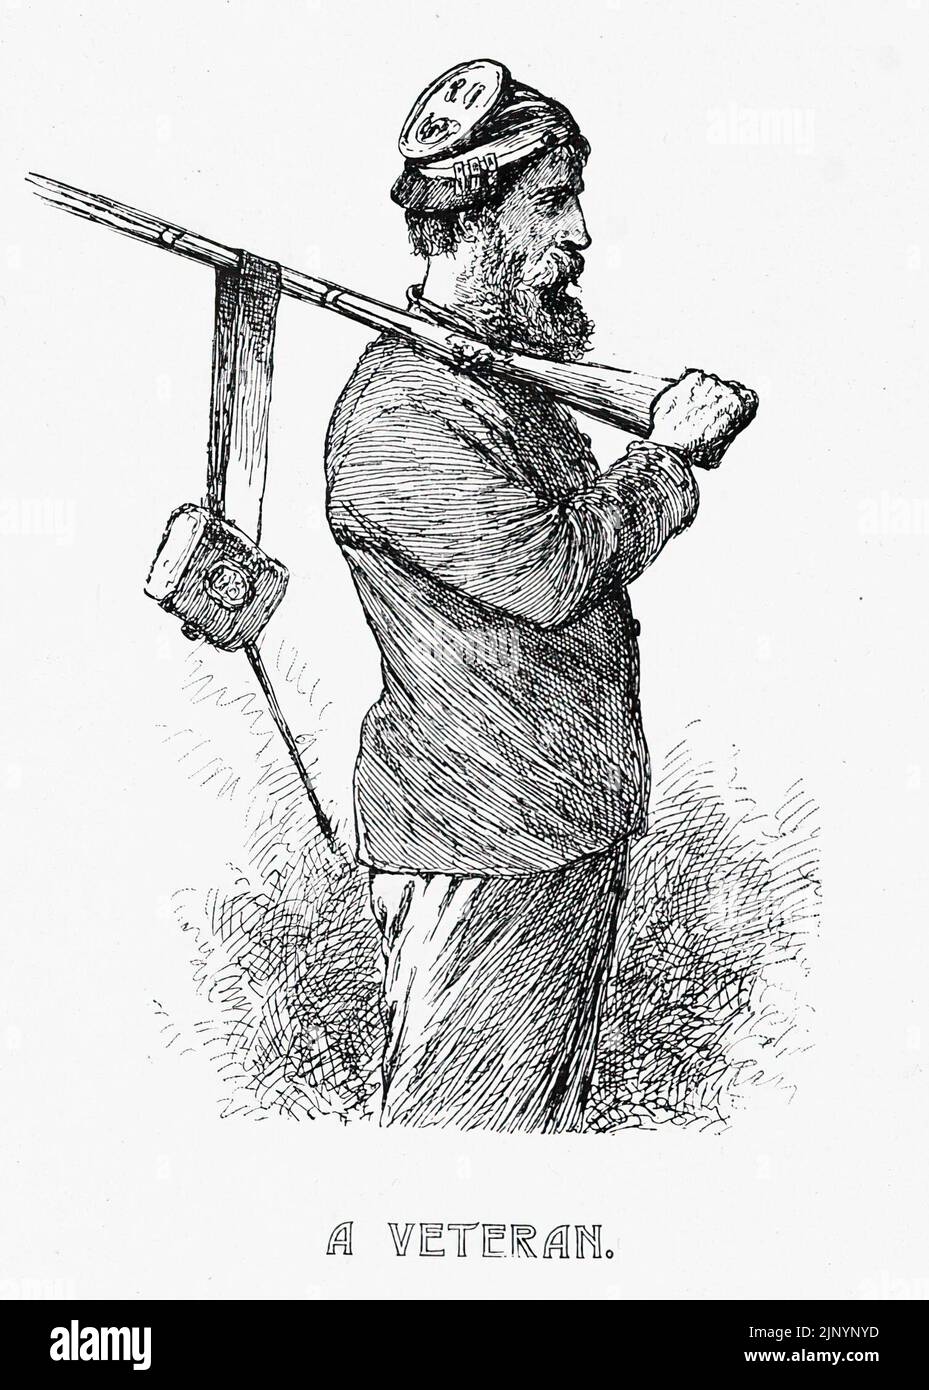 A Veteran. Union Army scout. 19th century American Civil War illustration by Edwin Forbes Stock Photo